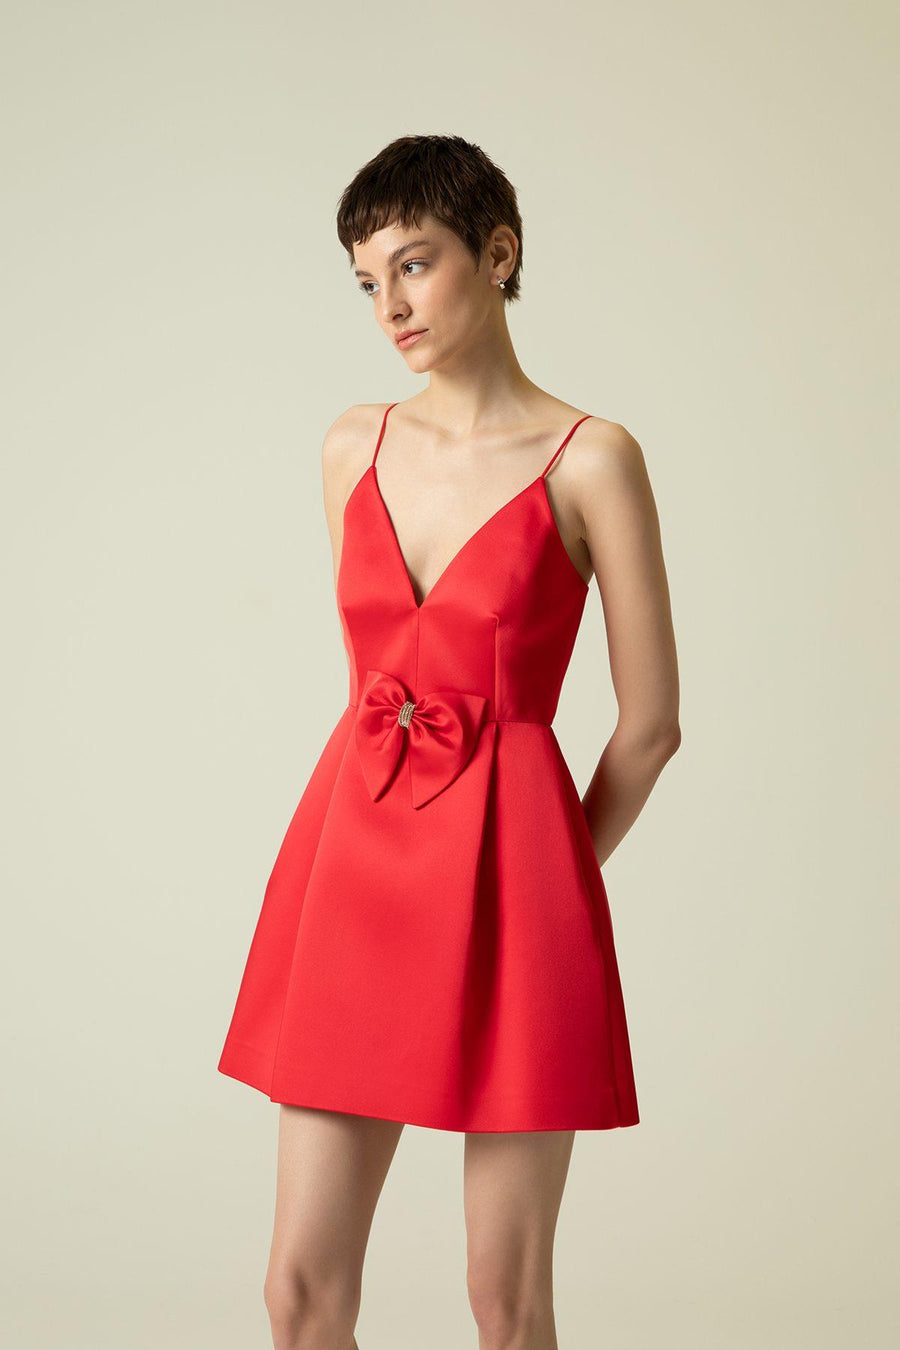 RUE Les Createurs Bow Detailed Red Mini Dress with Thin Straps - Porterist 2